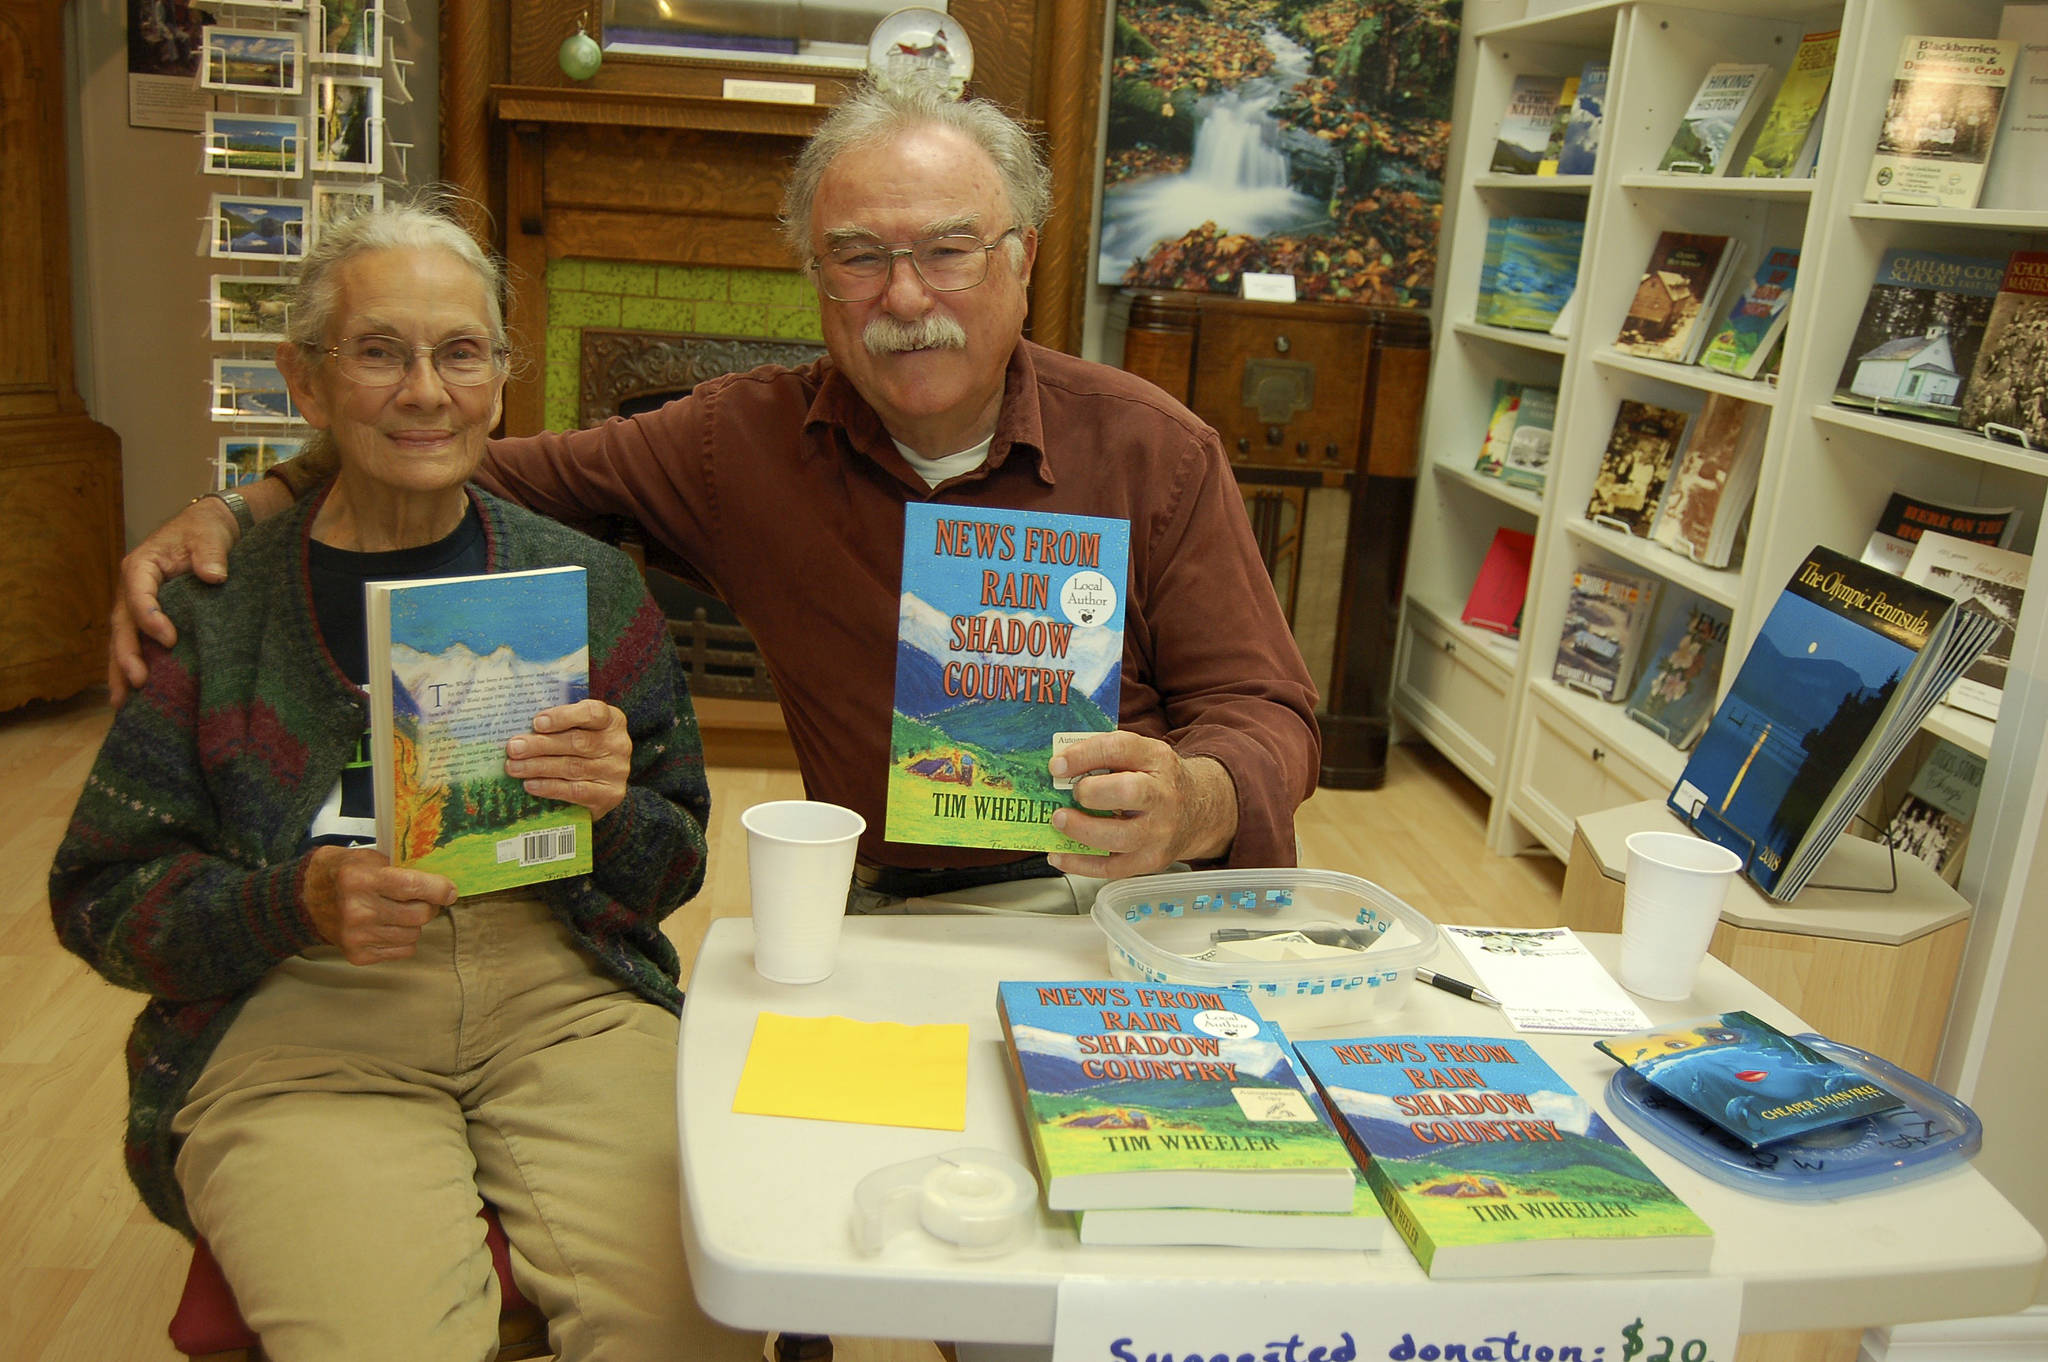 Tim Wheeler, pictured with his wife, Joyce, signs copies of “News from Rain Shadow Country” at Sequim Museum & Arts in early July. (Erin Hawkins/Olympic Peninsula News Group)